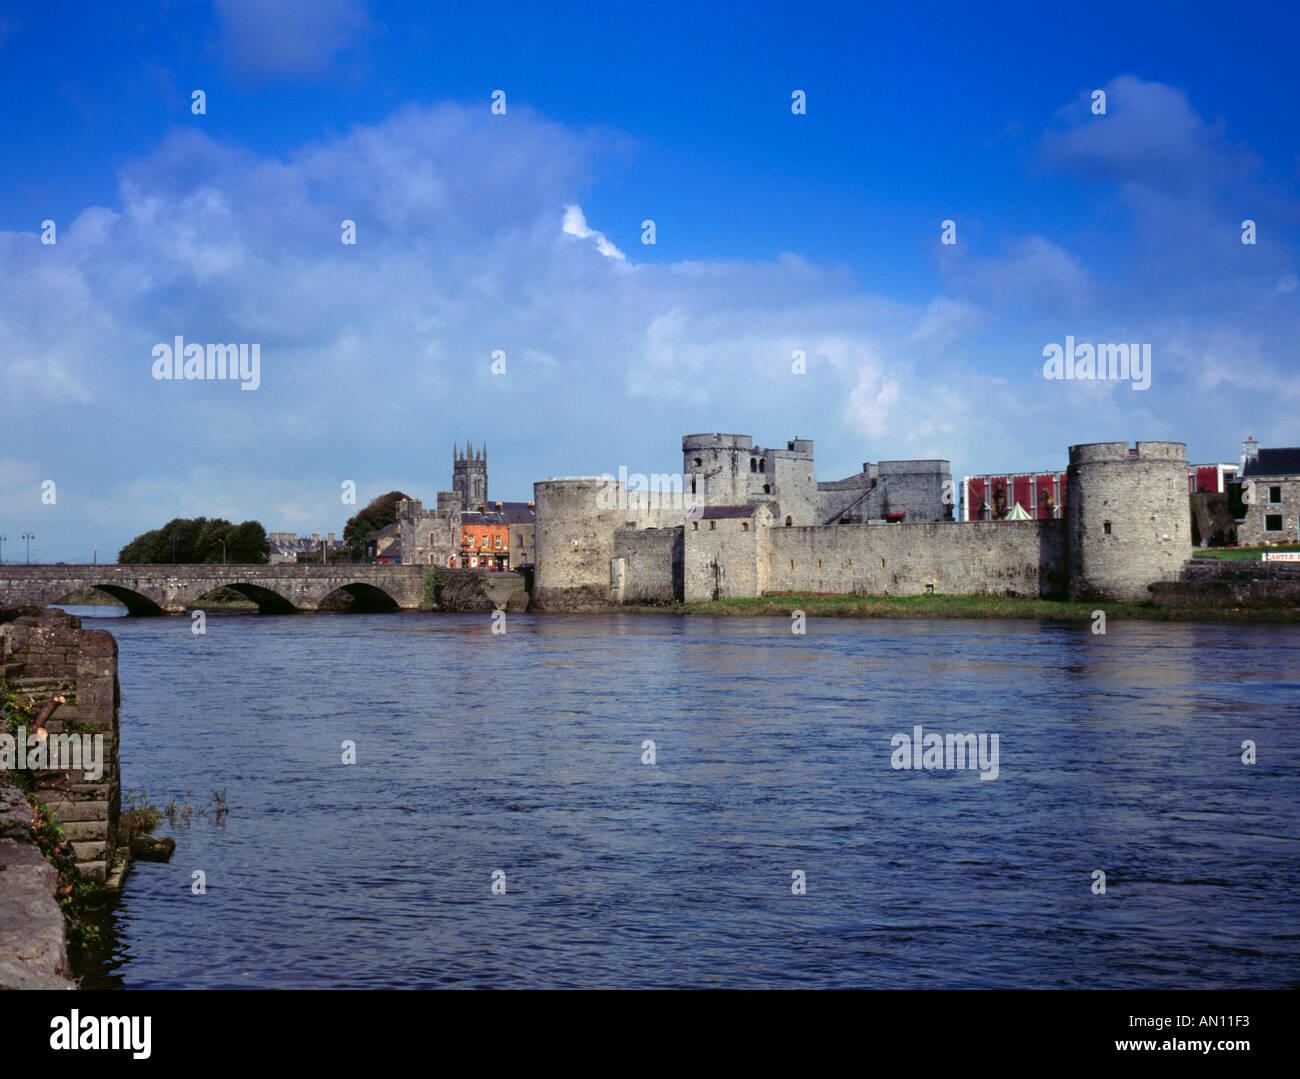 Panorama of Thomond Bridge and King John's Castle seen over the River Shannon, Limerick, County Limerick, Eire. Stock Photo